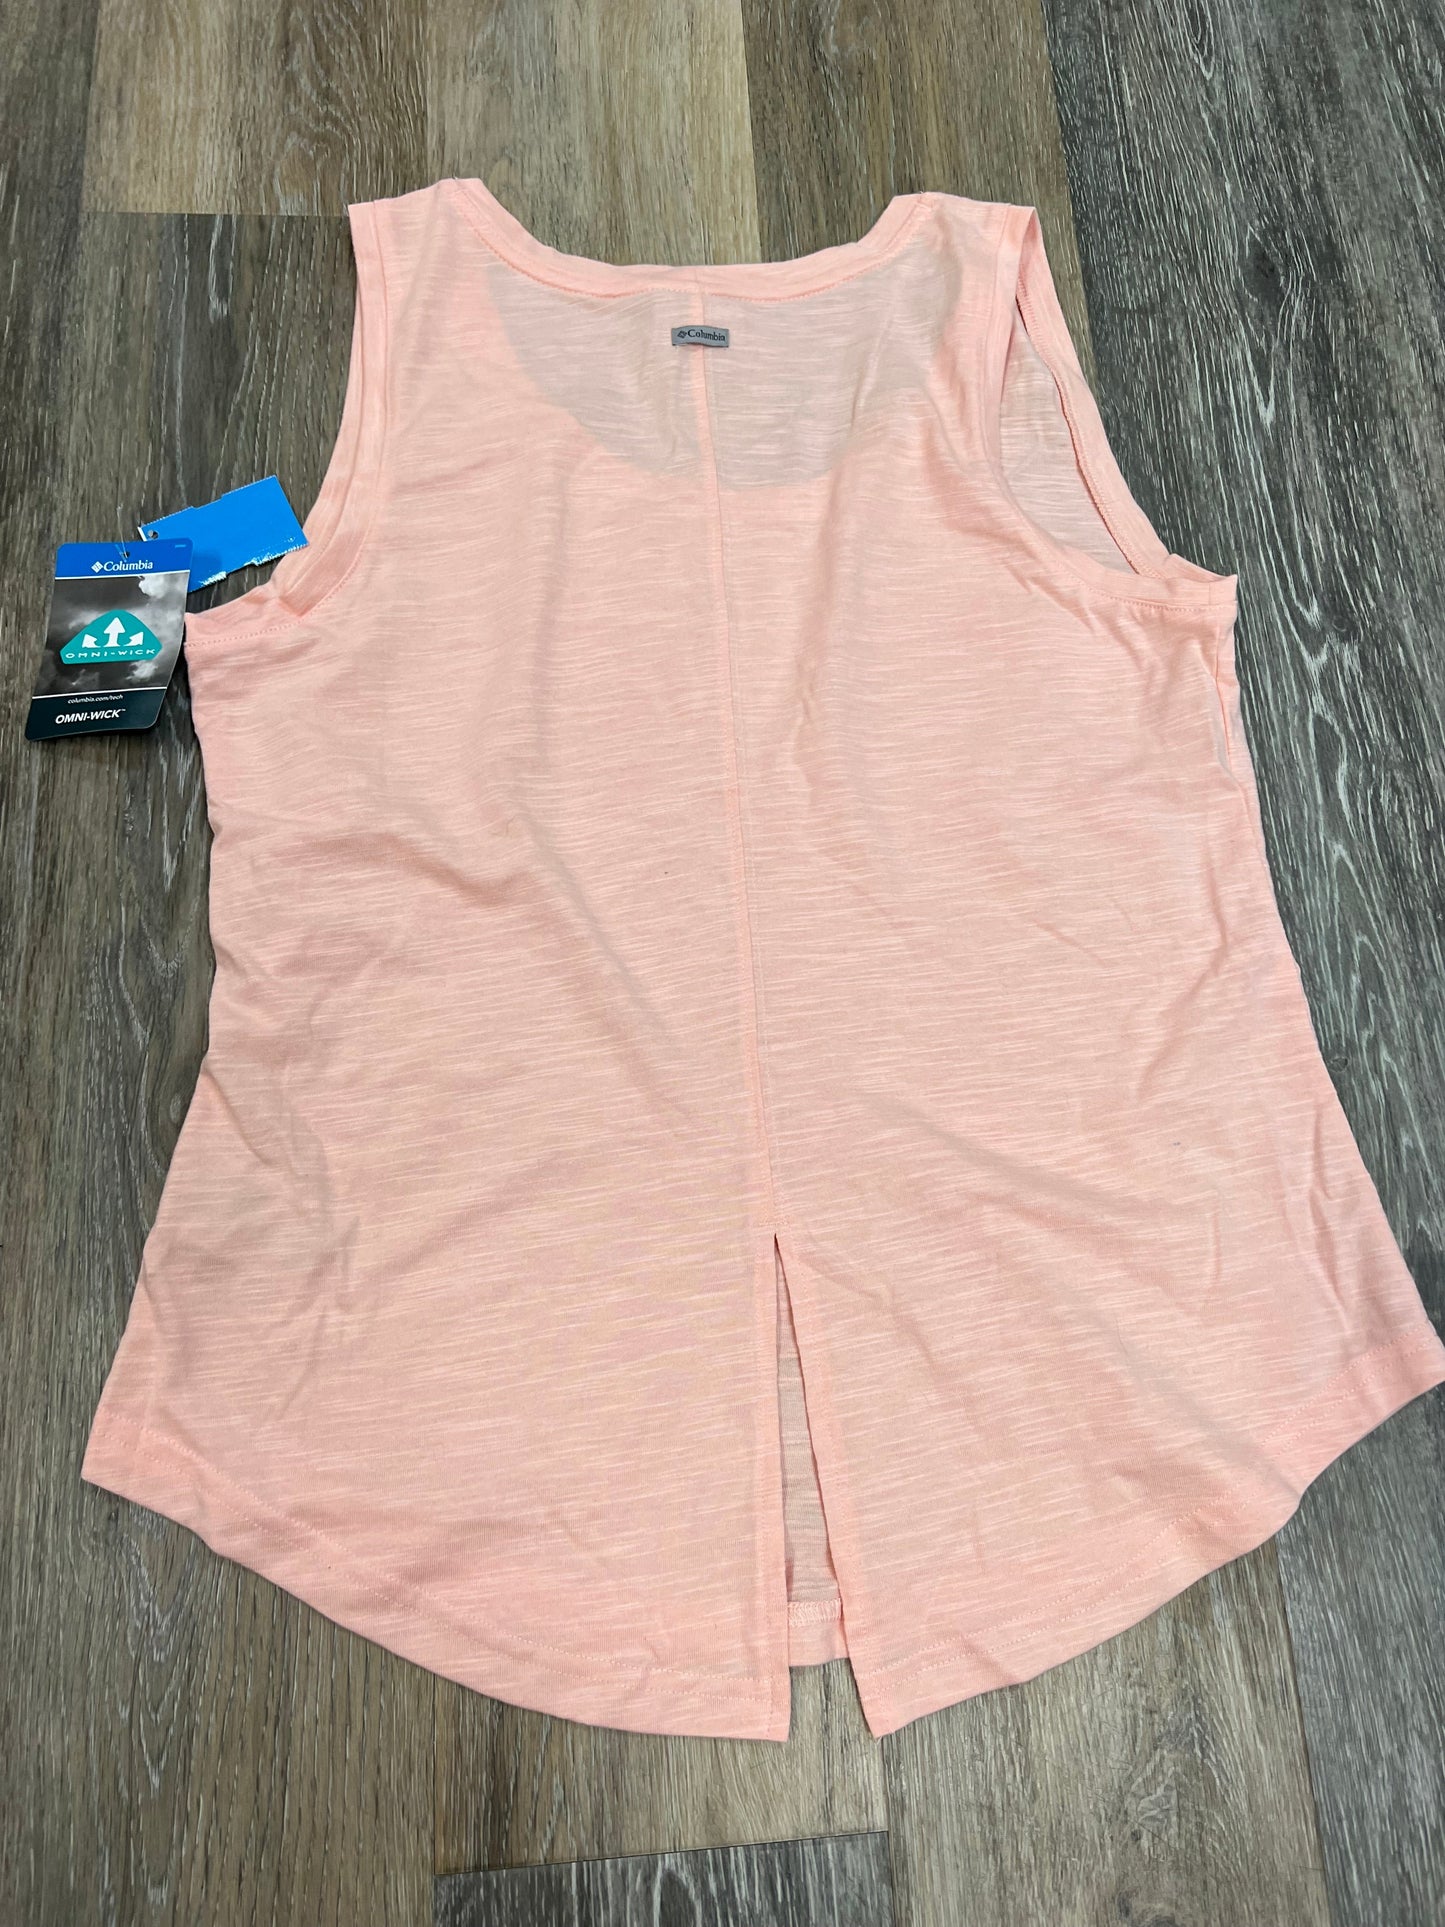 Pink Athletic Tank Top Columbia, Size M